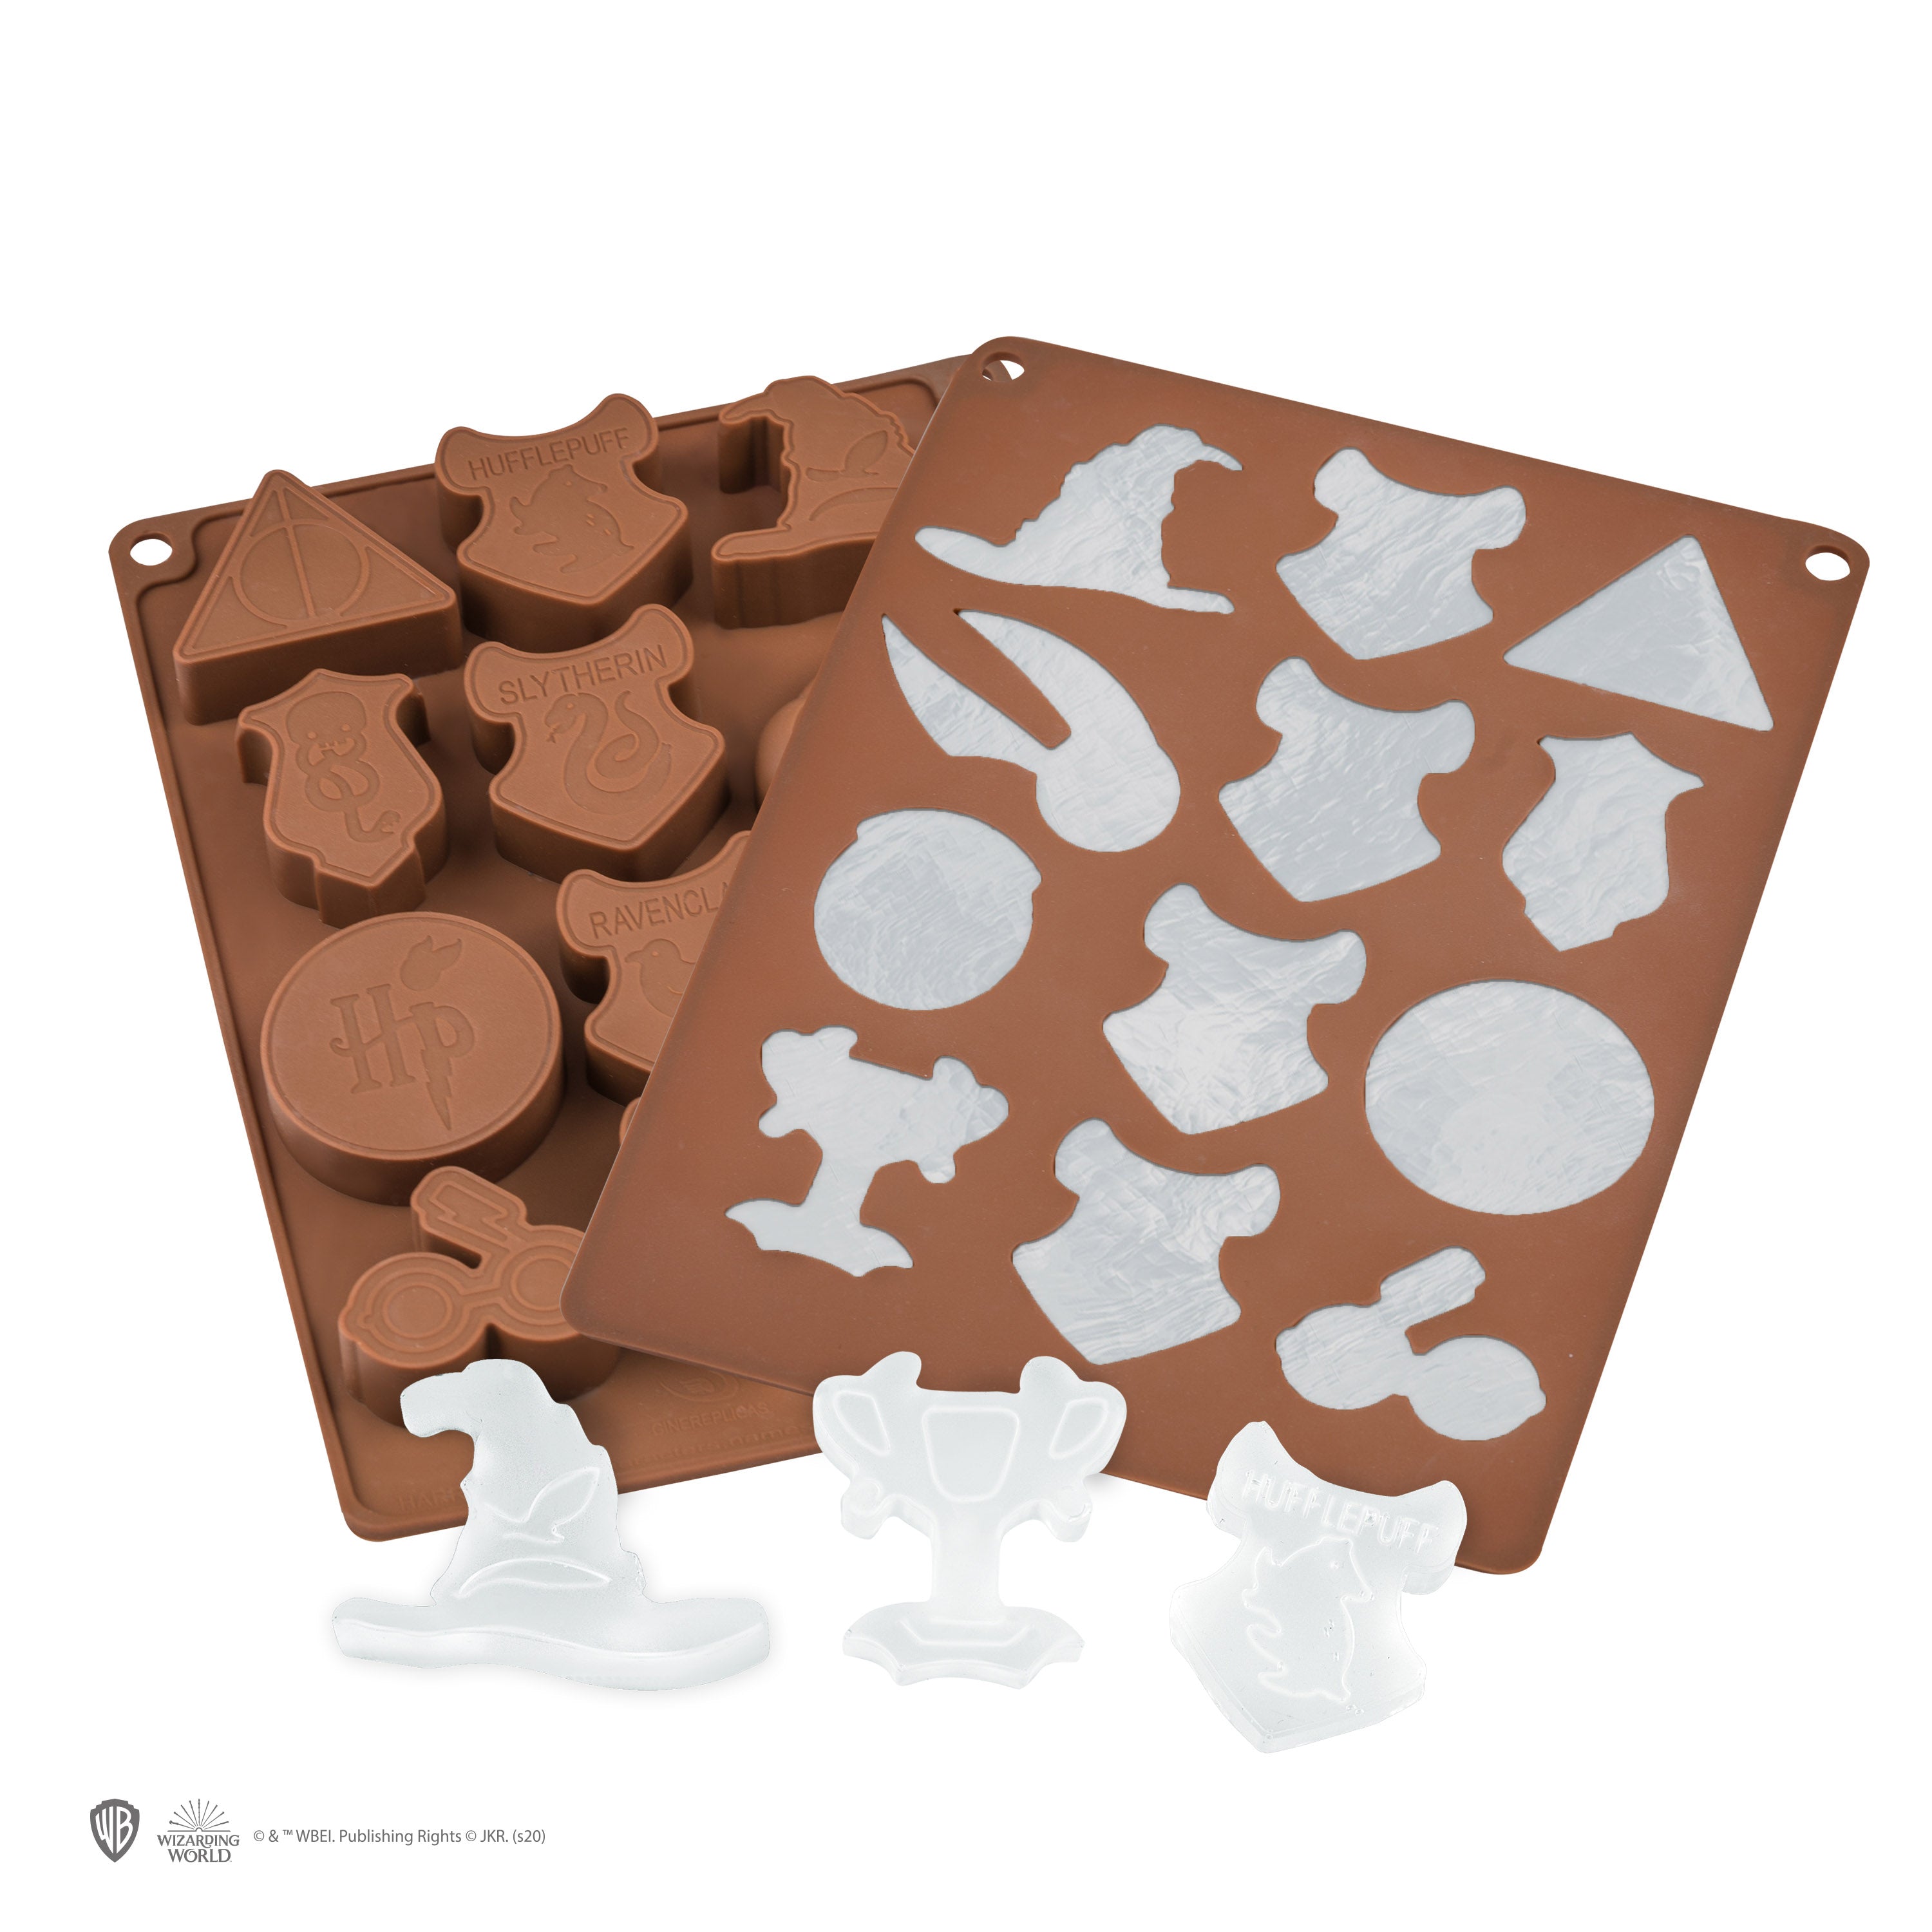 Chocolate/ice cube mould - Characters